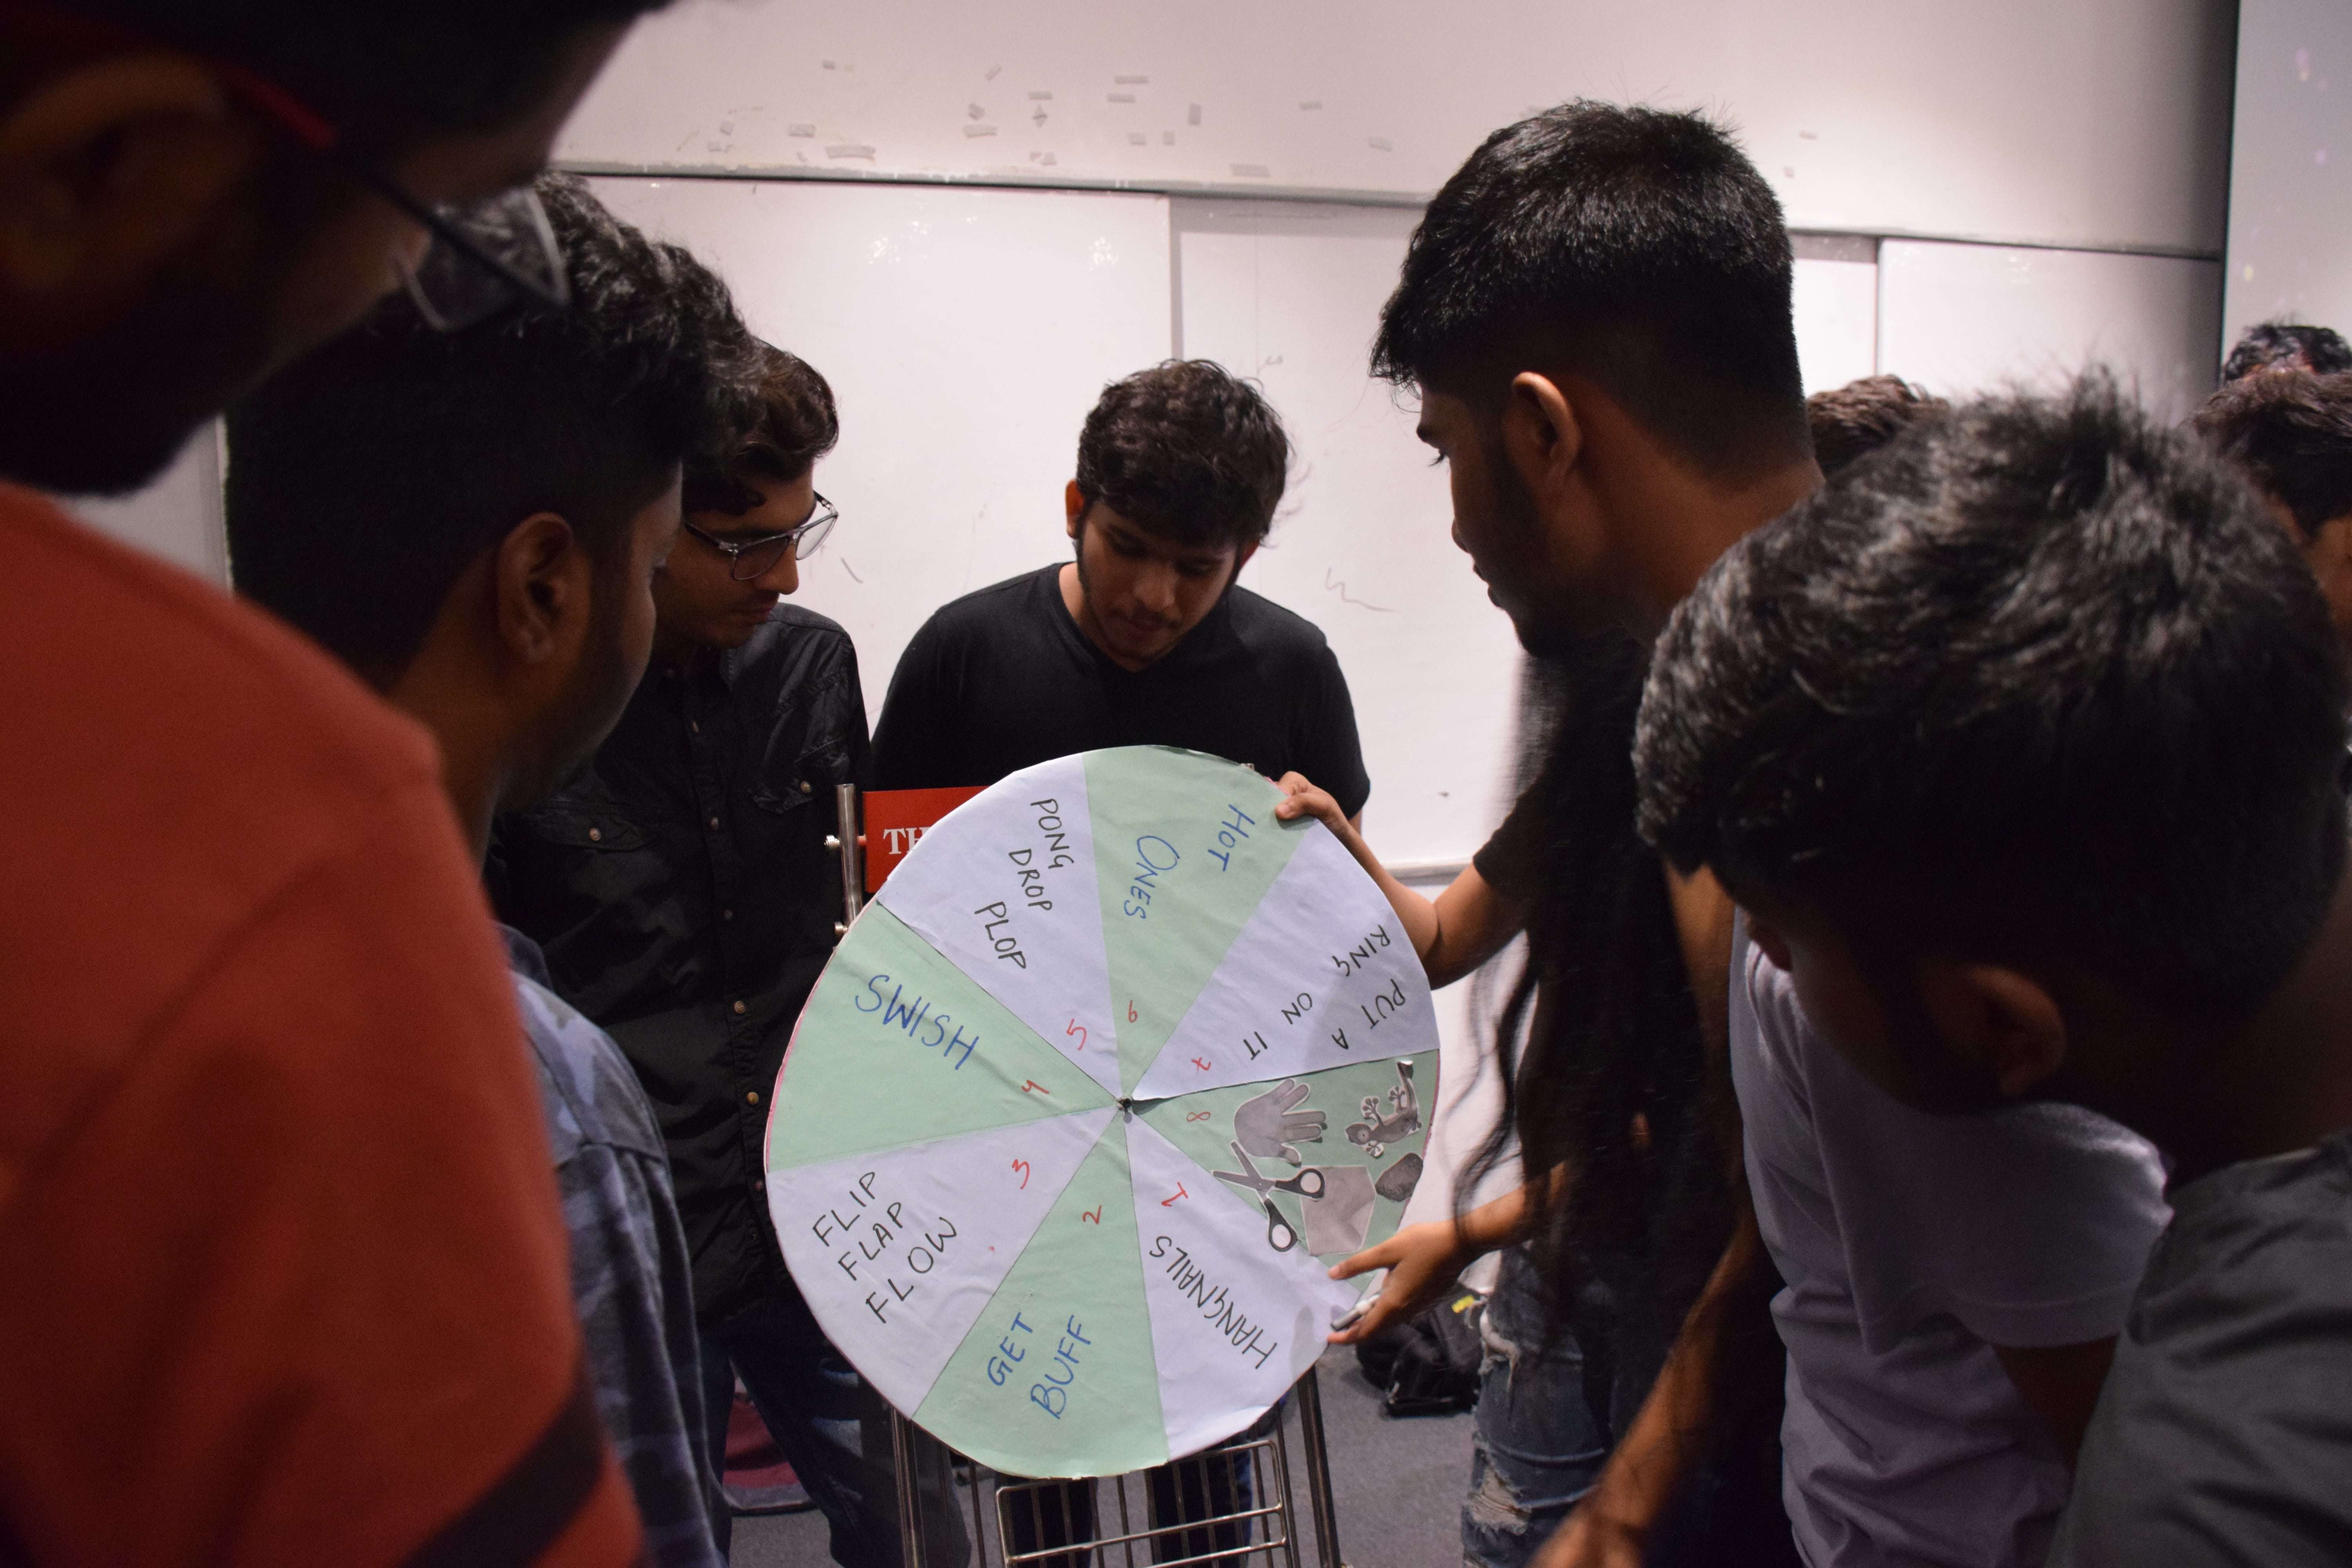 The ‘wheel of fate’ containing 6 activities (hence the name of the event) decided which activities the teams had to compete in